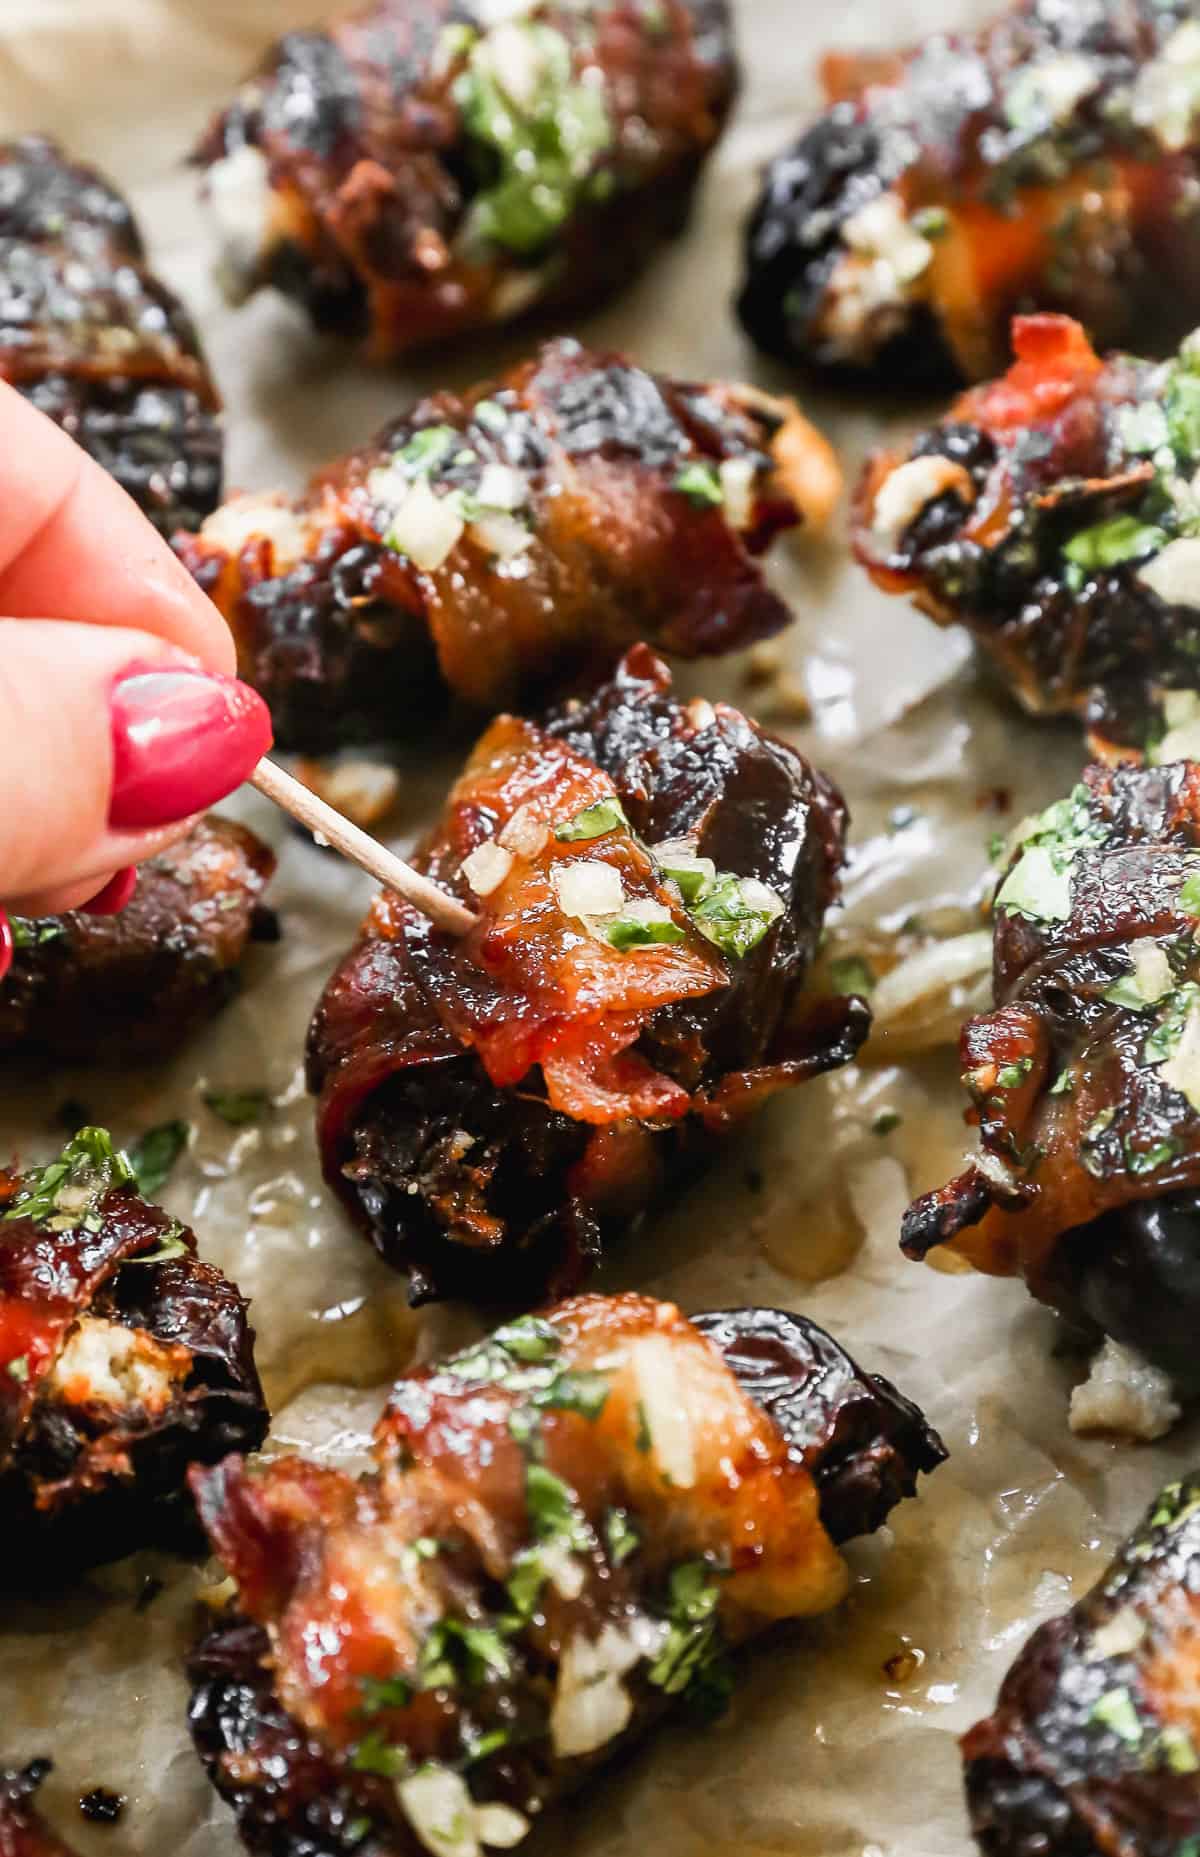 A close up image of bacon wrapped dates with someone about to pick one up with a toothpick.